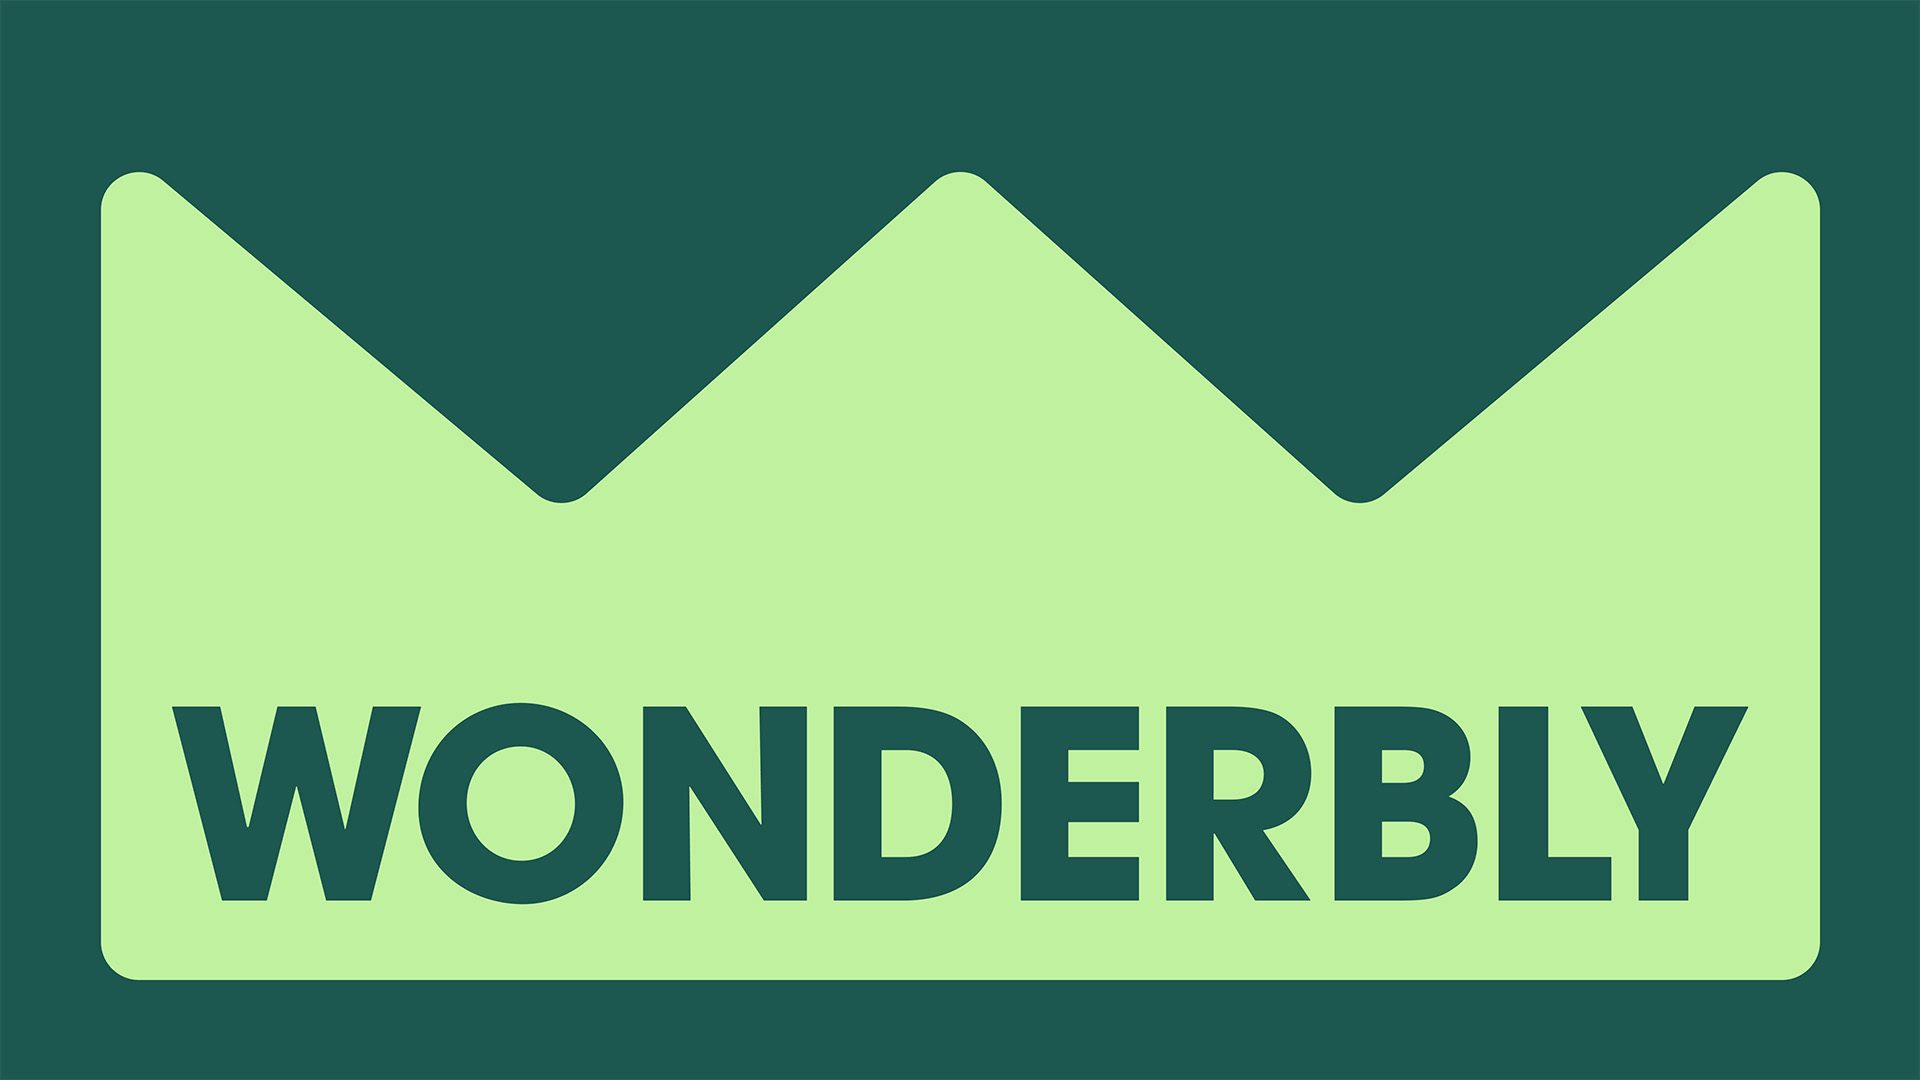 Wonderbly's logo in the show of a pale green crown and the brand name contained within the shape in a dull teal serif typeface